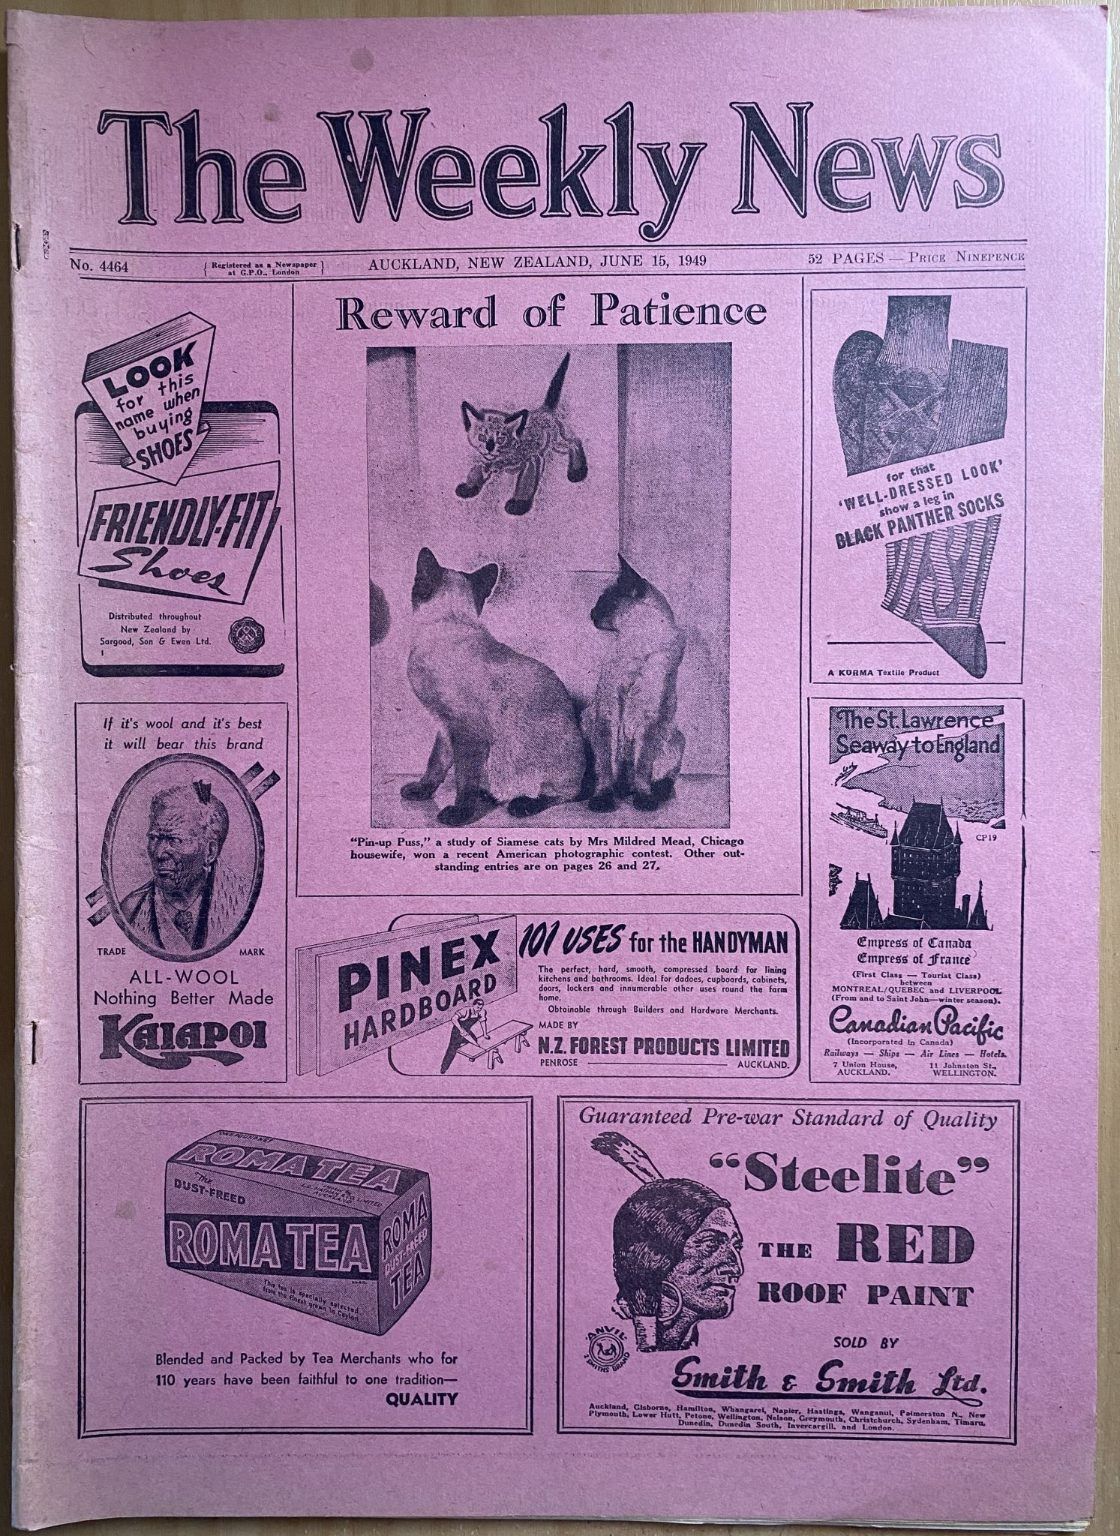 OLD NEWSPAPER: The Weekly News, No. 4464, 15 June 1949